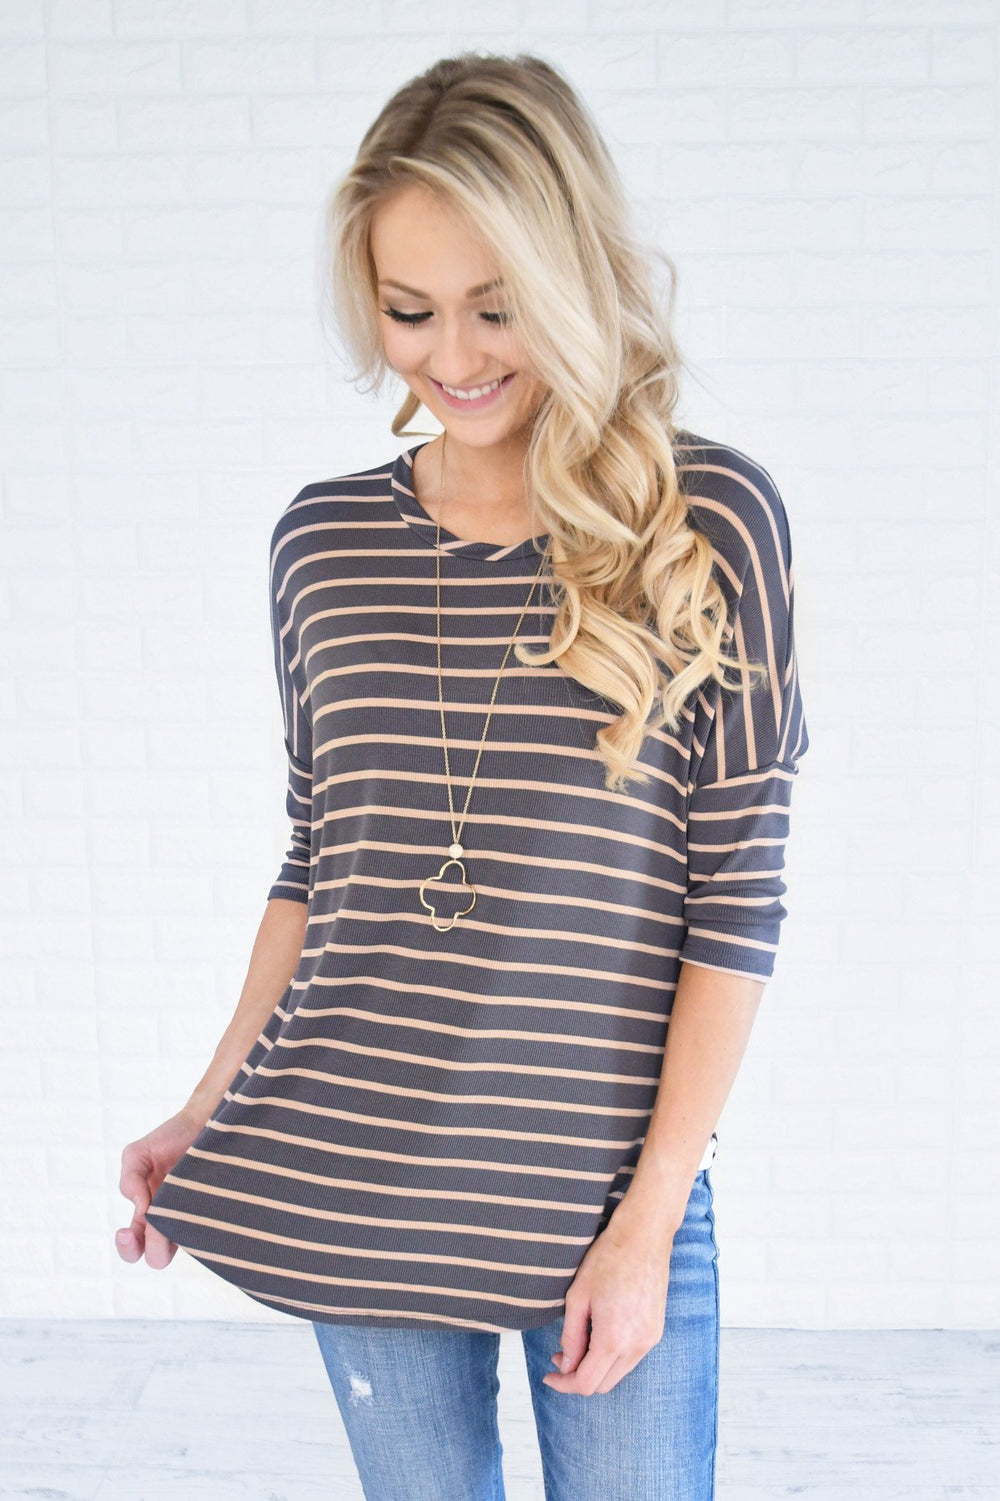 Charcoal & Tan Striped Top – The Pulse Boutique